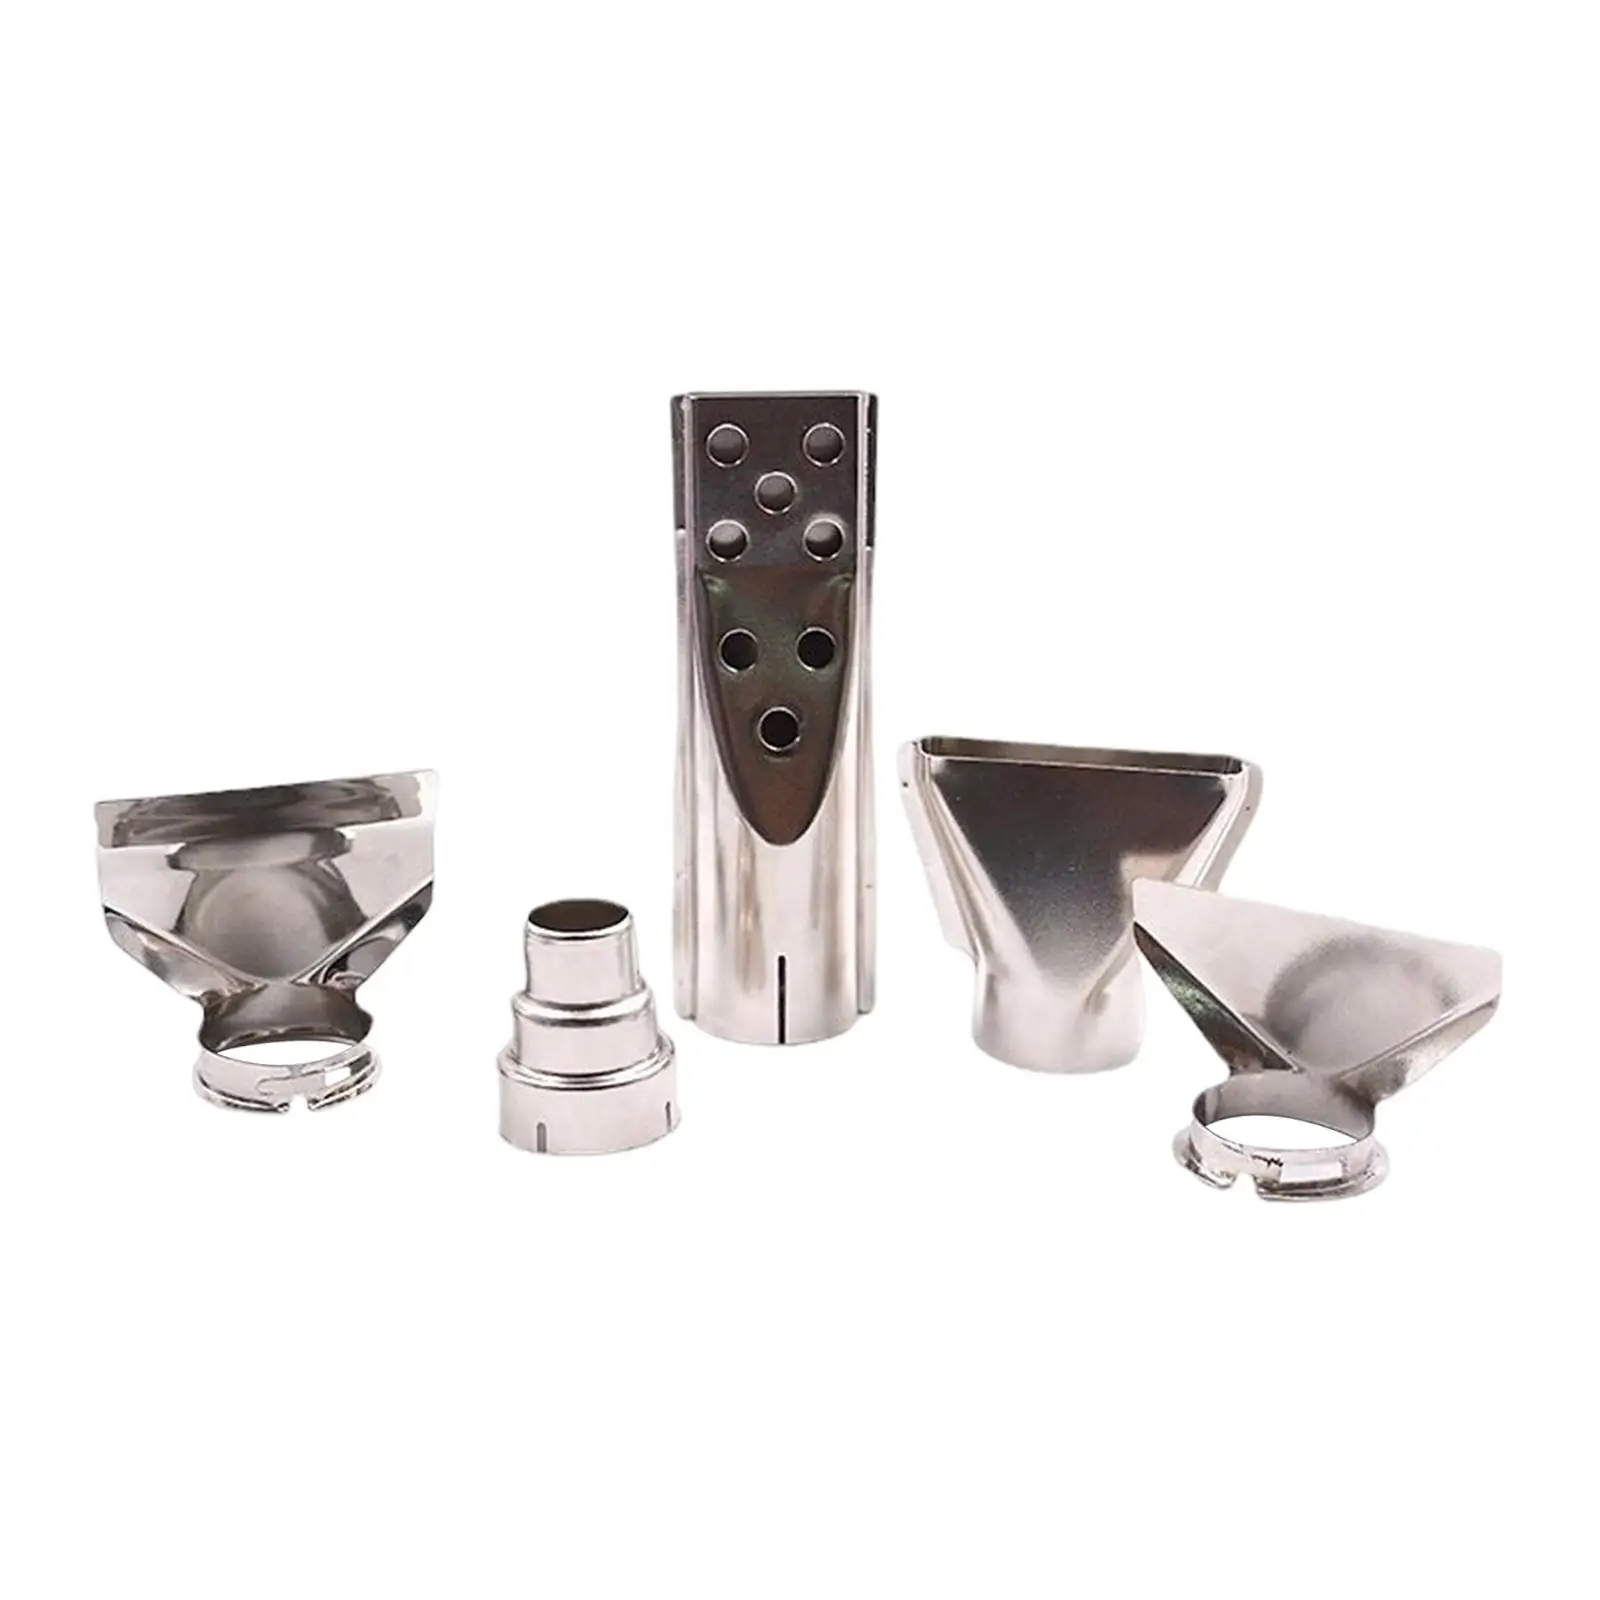 5x Multifunctional Heat Nozzle Attachments Steel Nozzles Replacement Kits for Shrinking Heat